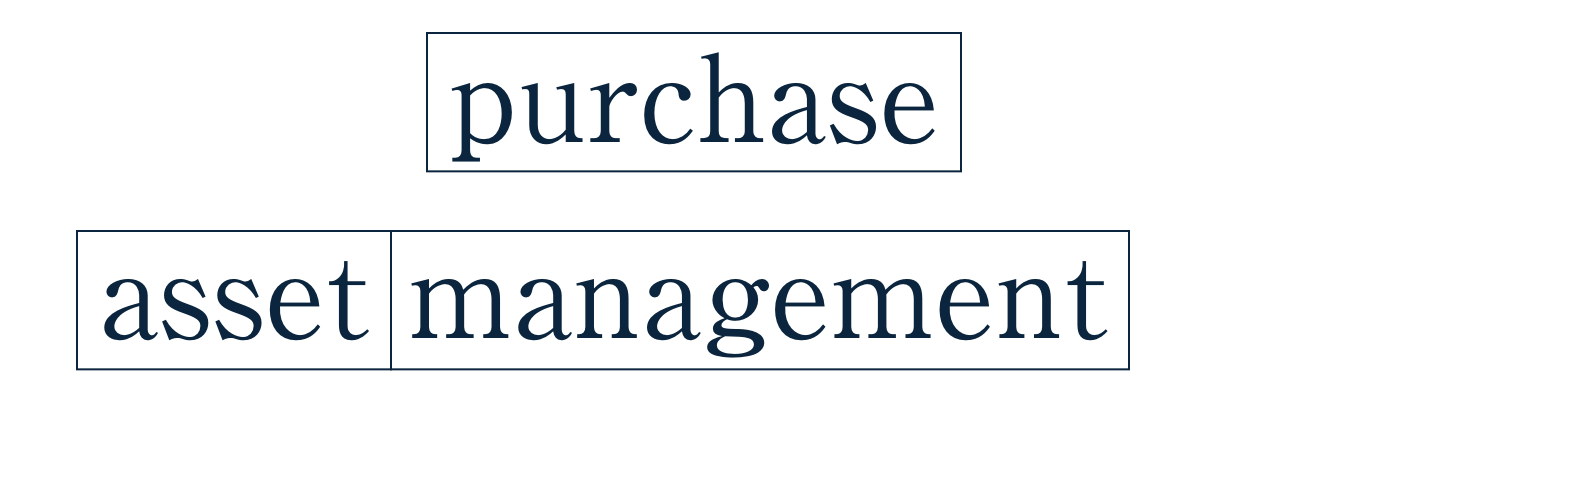 For both the purchase of your property and asset management without loss, let Atelier RacTas handle it!